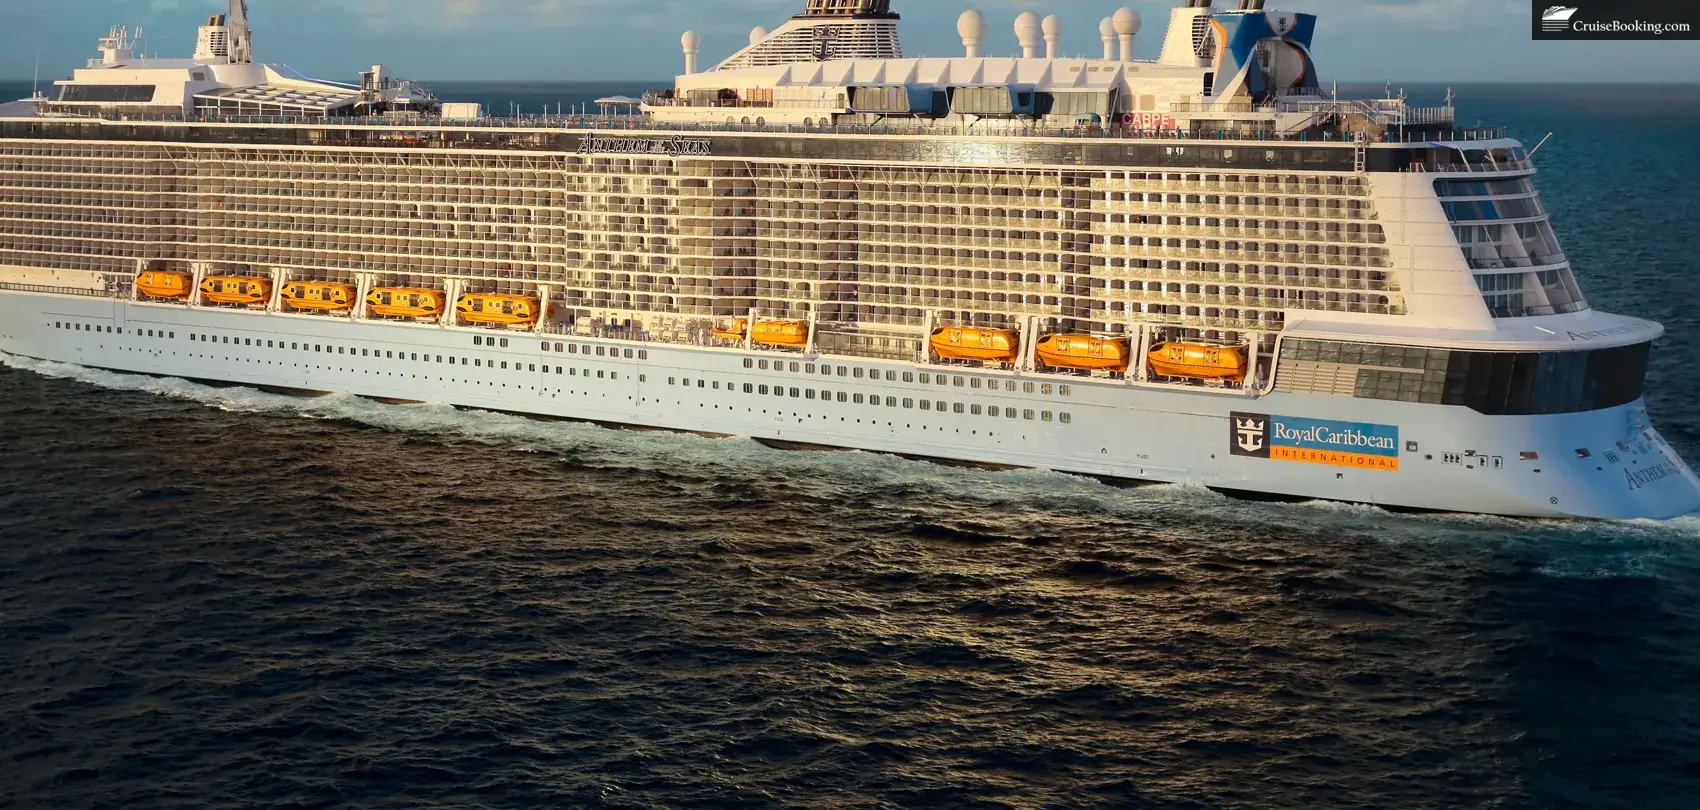 Anthem of the Seas at sea, with clouds and sunset